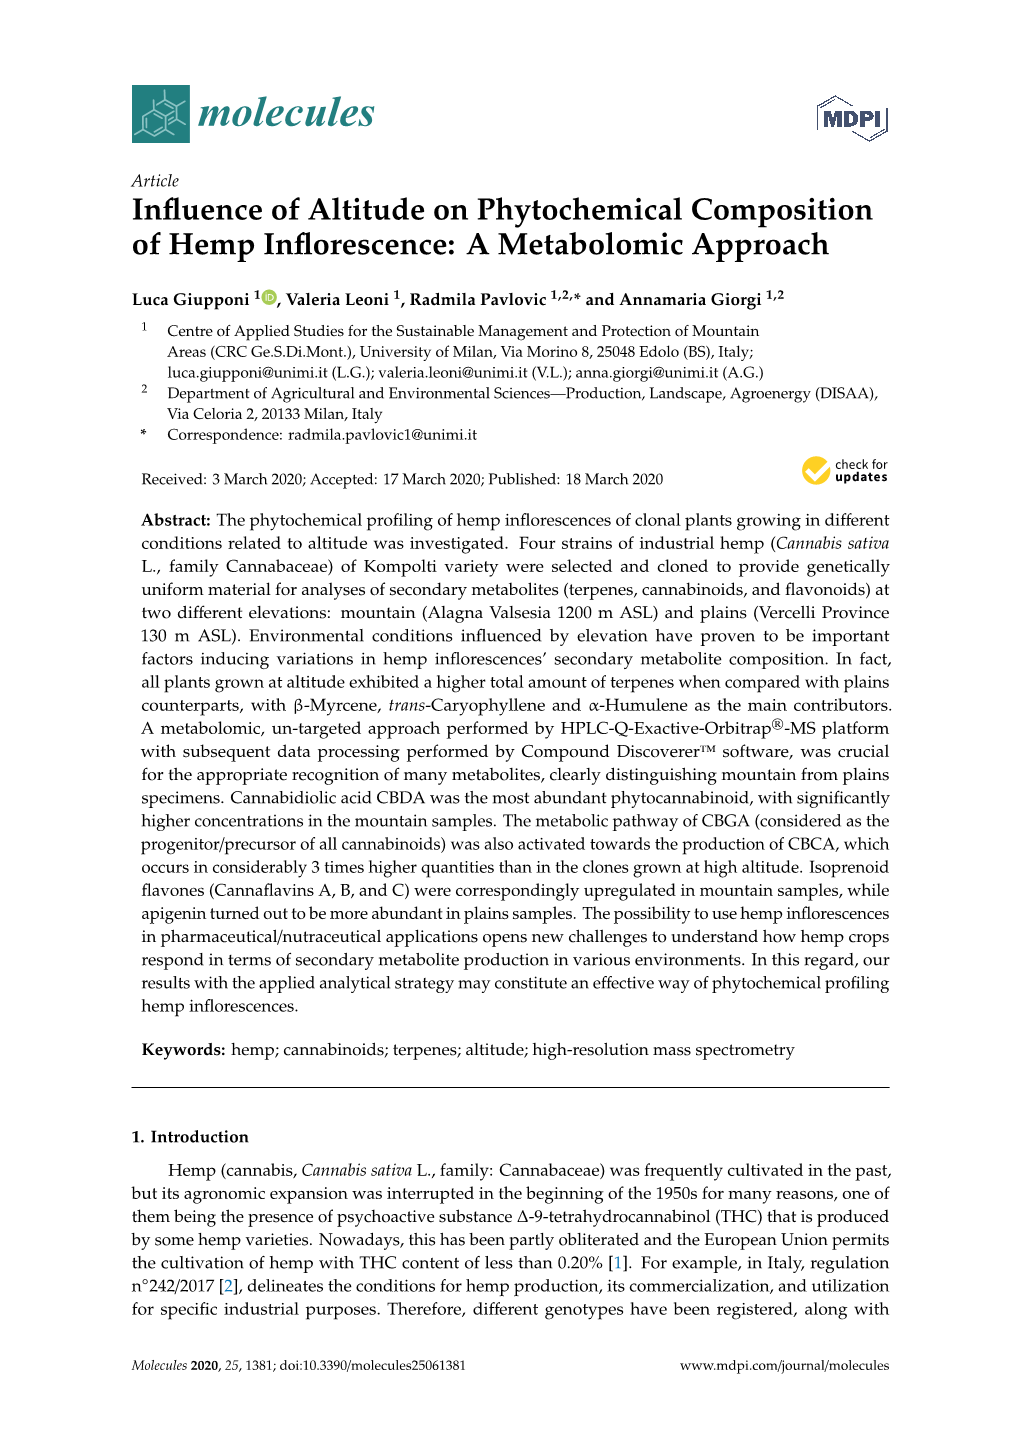 Influence of Altitude on Phytochemical Composition of Hemp Inflorescence